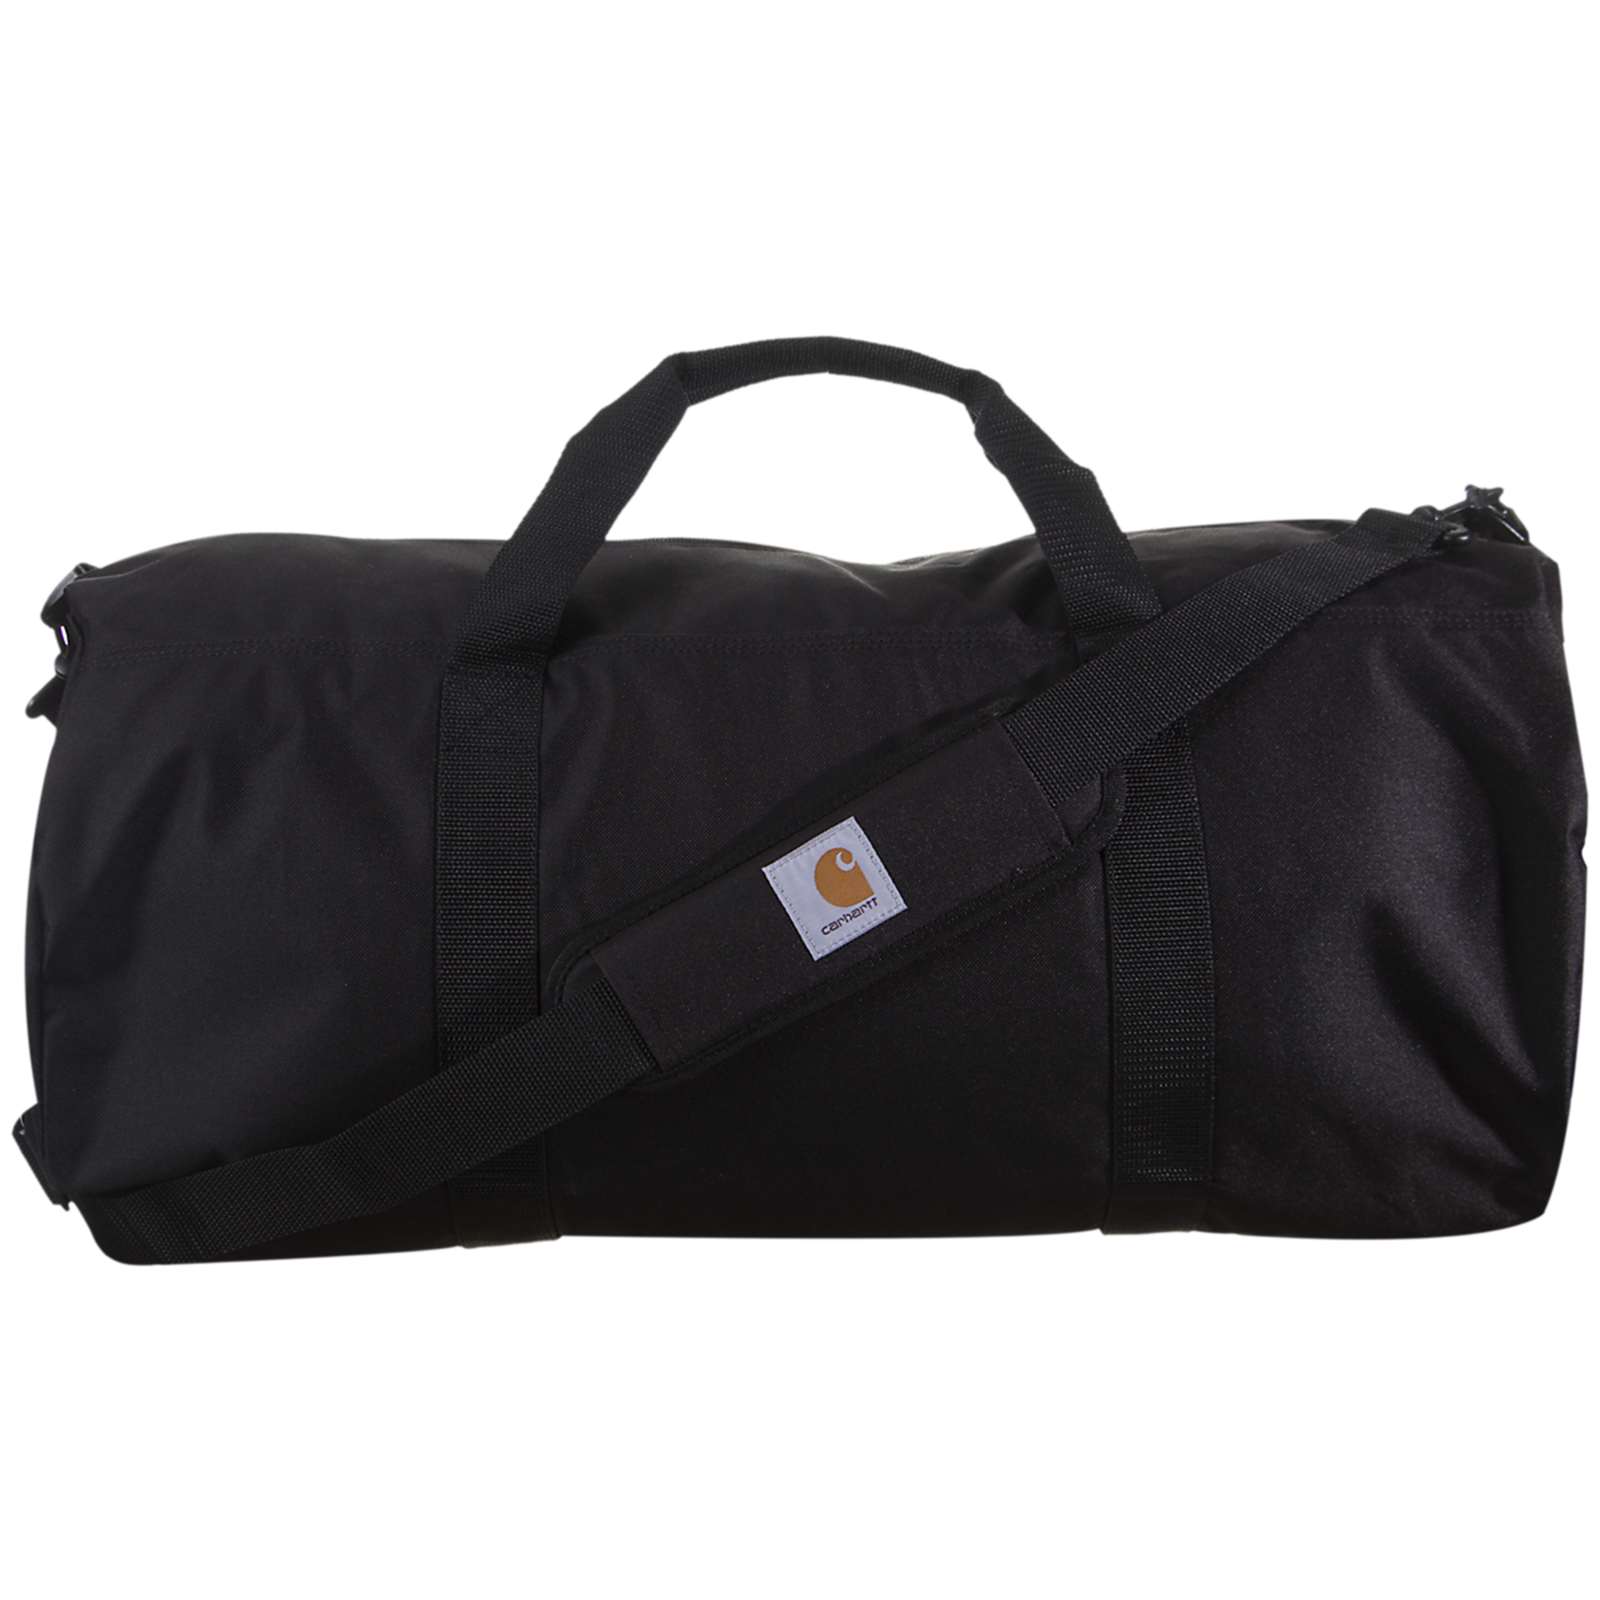 Carhartt Trade Series Large Duffel + Utility Pouch - 16021101blk ...